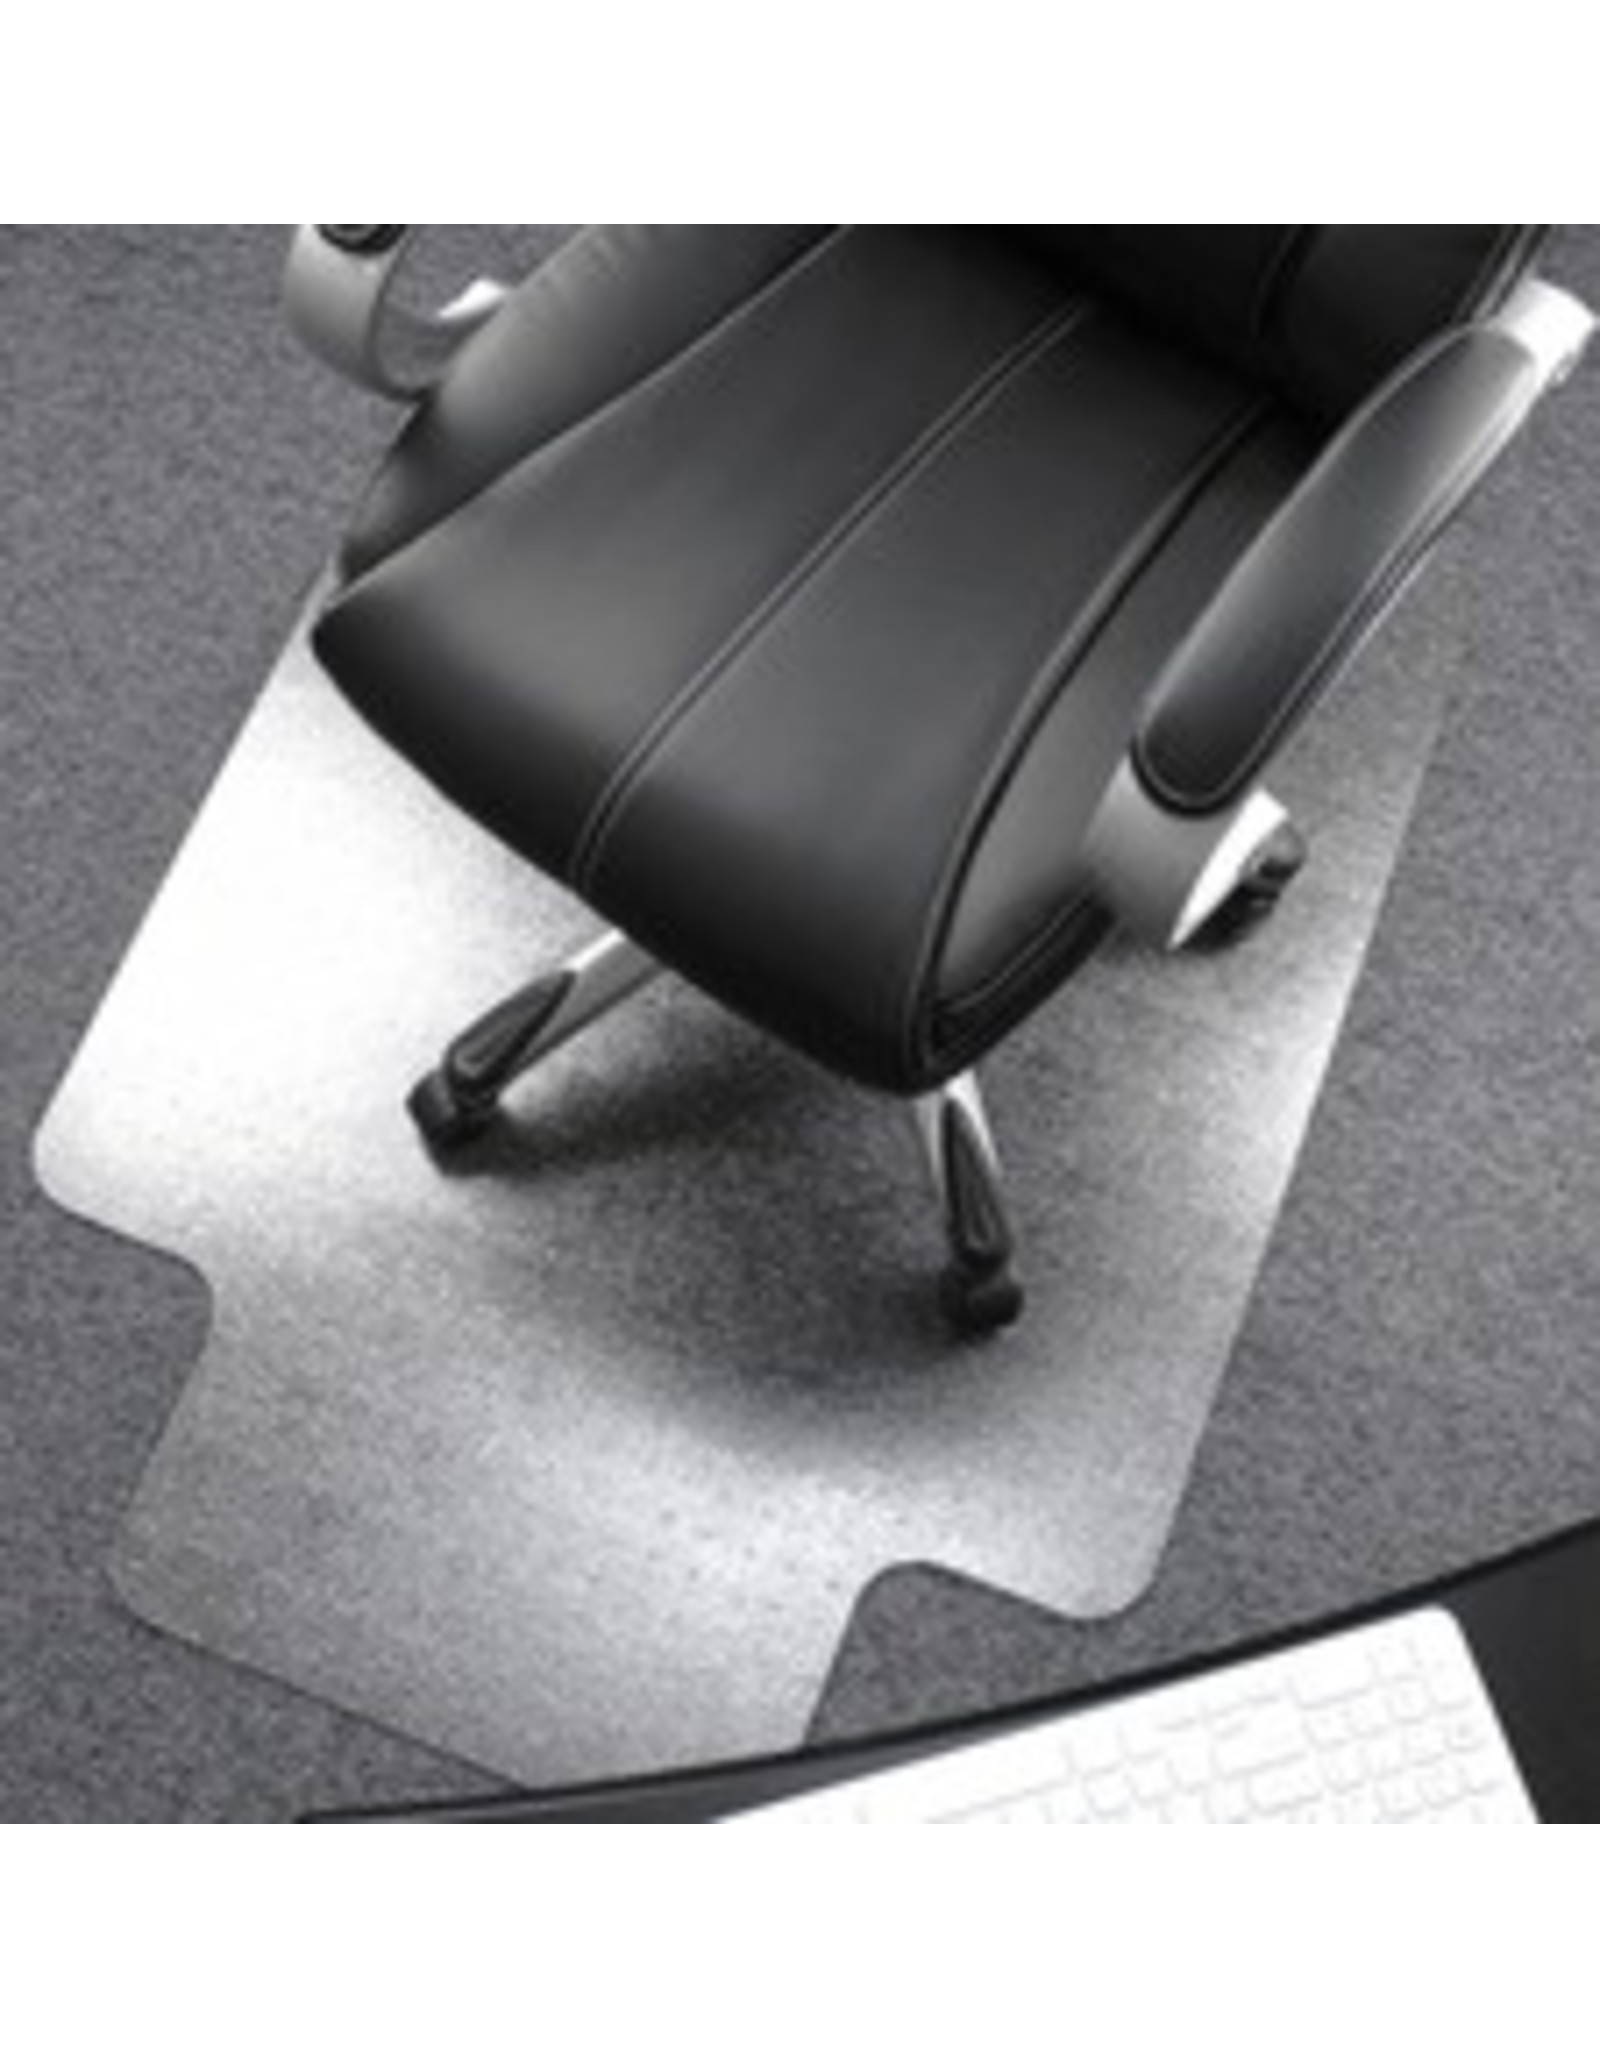 CHAIRMAT POLY-C MED PILE*48x53